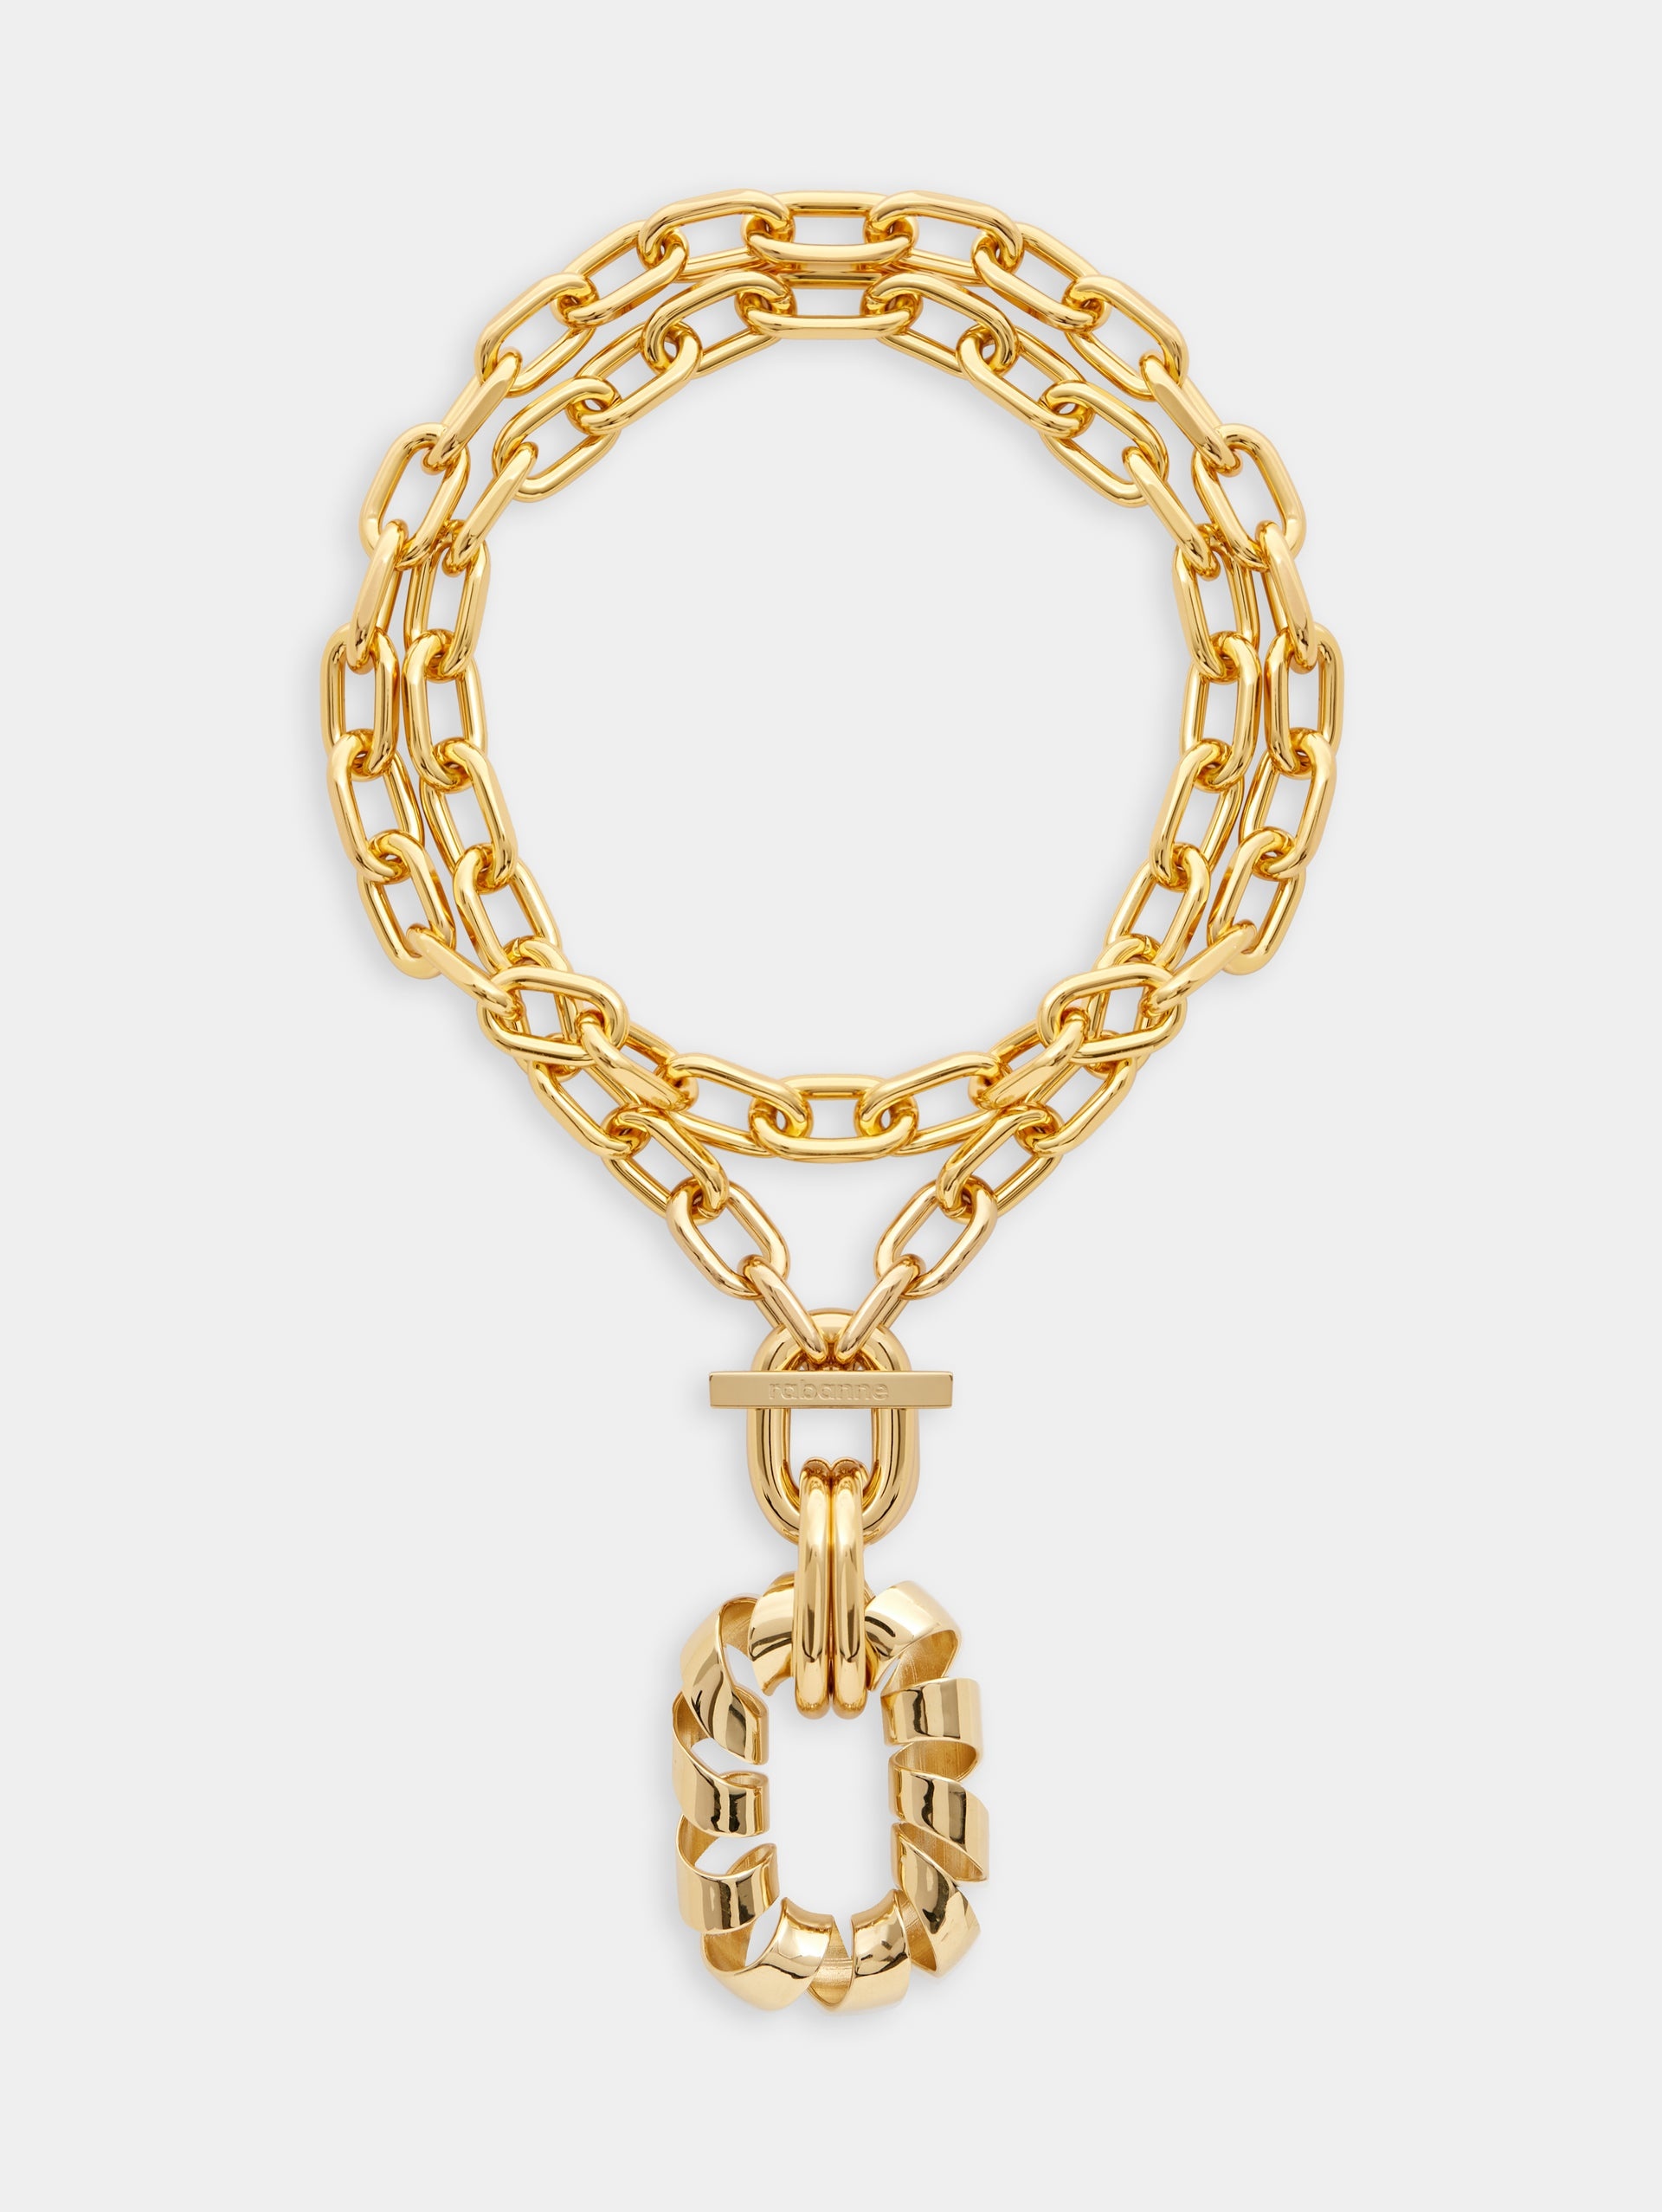 GOLD DOUBLE XL LINK TWIST NECKLACE WITH PENDANT - 1